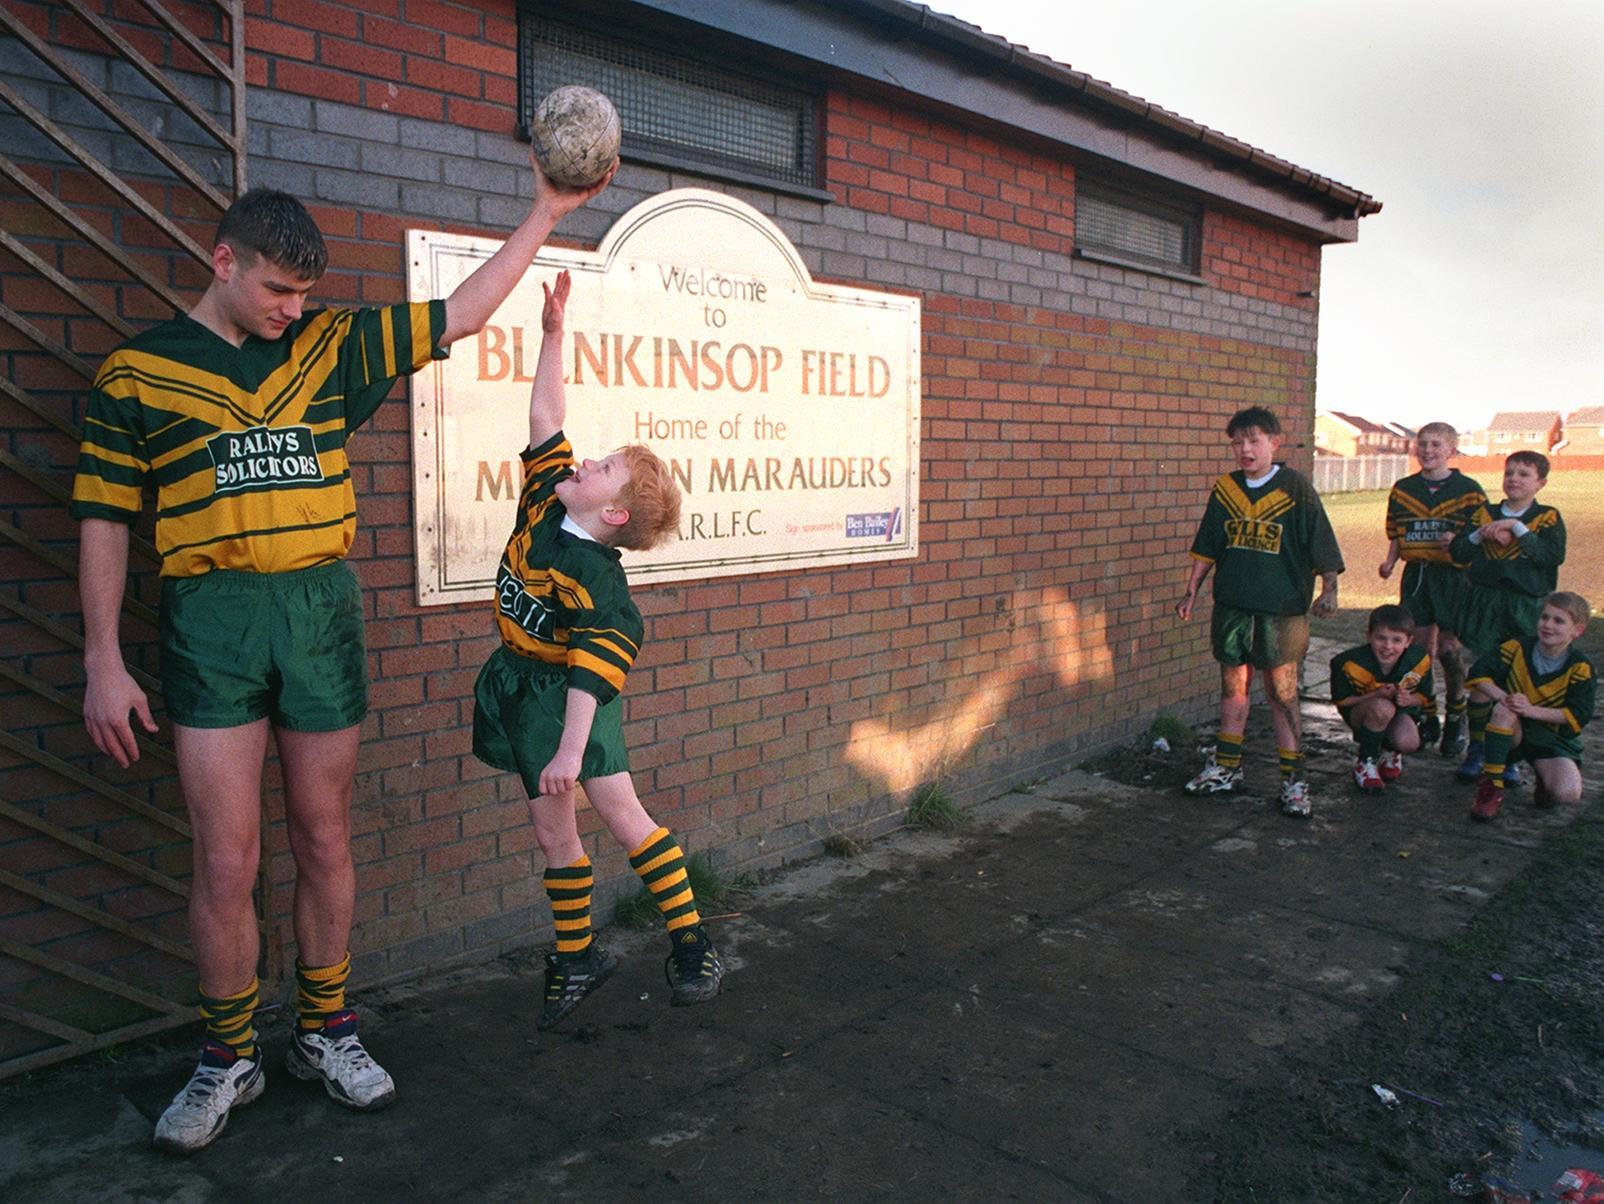 Middleton Marauders enjoy a training session after the team received help and sponsorship due to vandalism at their clubhouse.